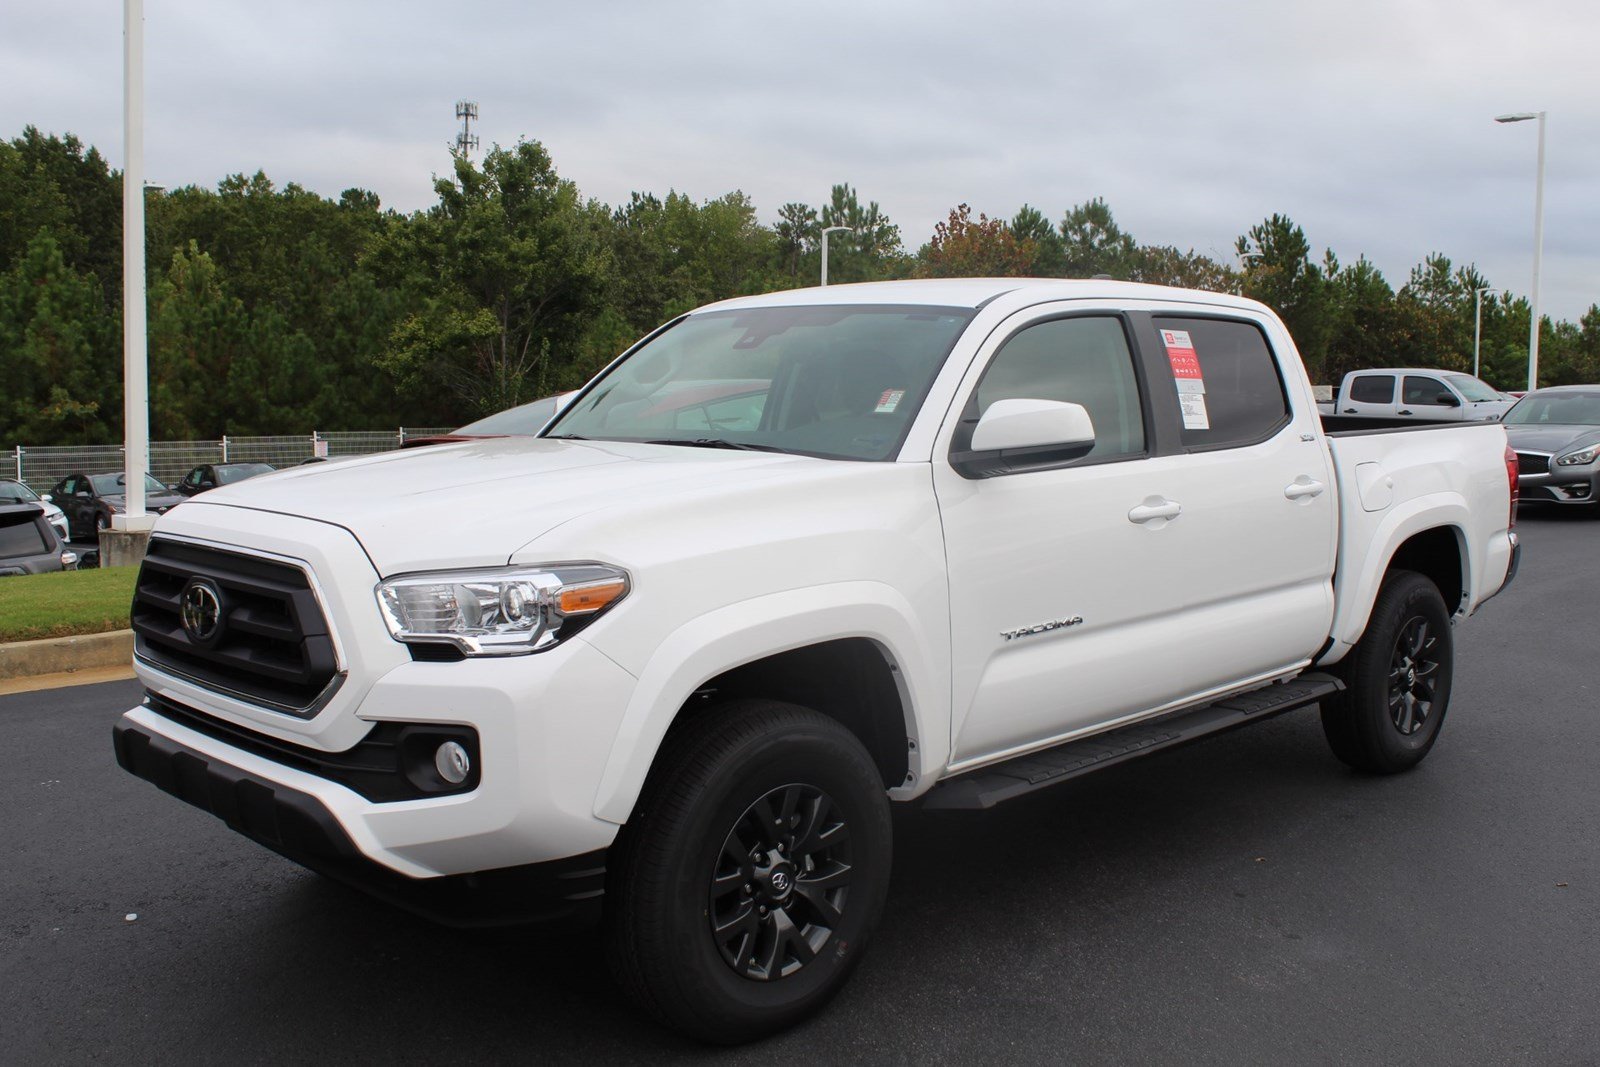 New 2020 Toyota Tacoma 4WD SR5 Double Cab in Macon #M290867 | Butler